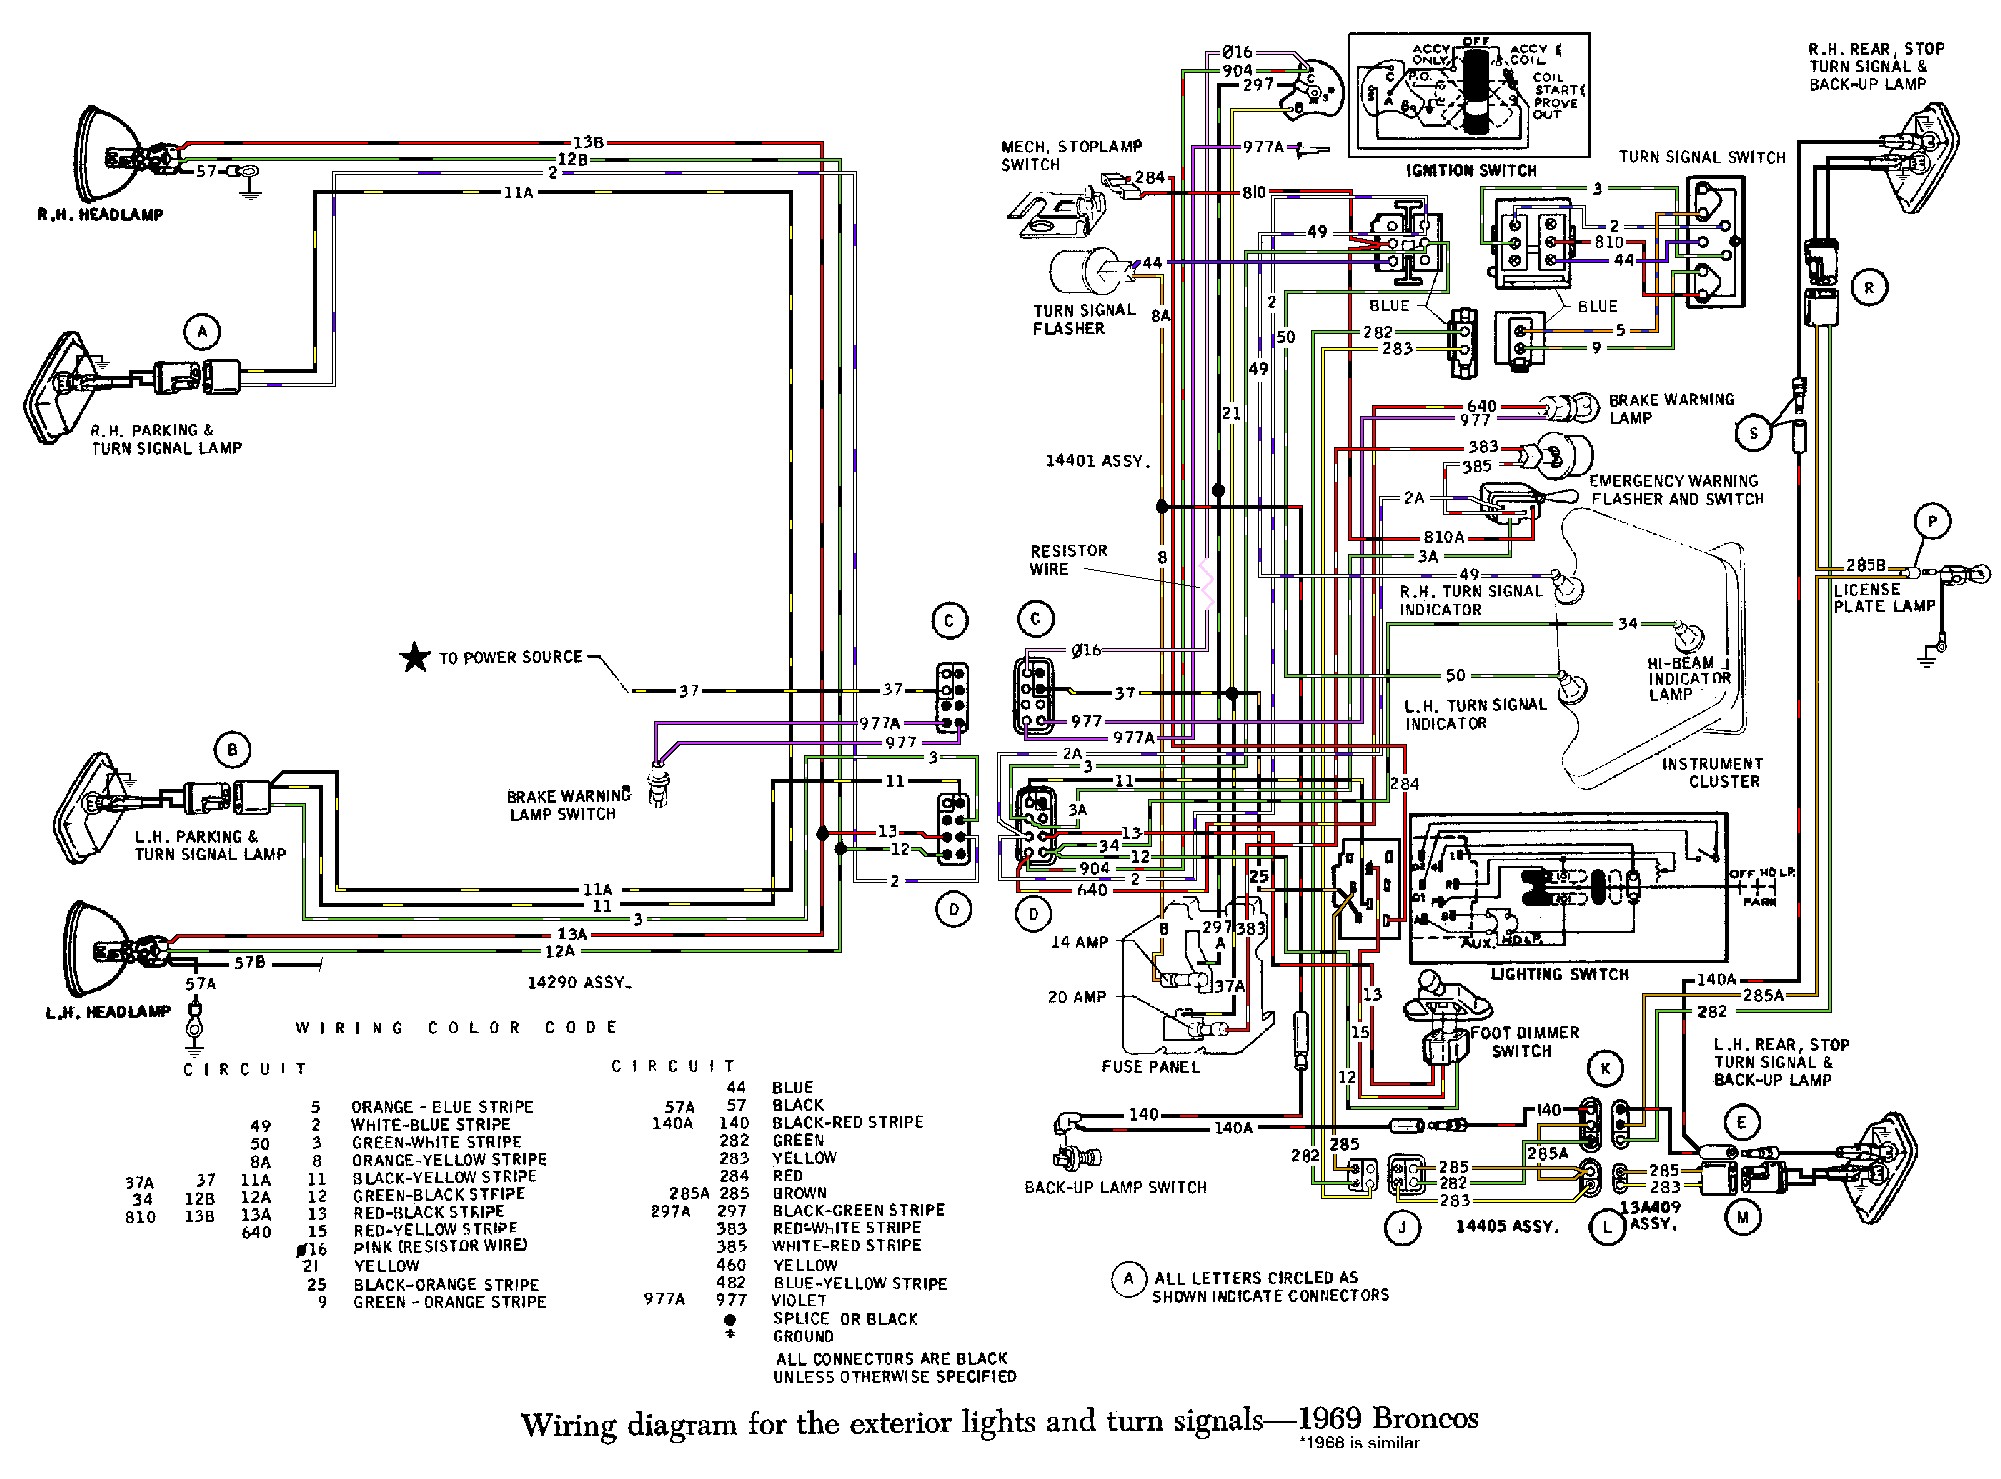 How to Wire A Fuse Box Diagram 2000 Nissan Maxima Fuse Box Diagram 1994 ford Bronco Fuse Box Of How to Wire A Fuse Box Diagram